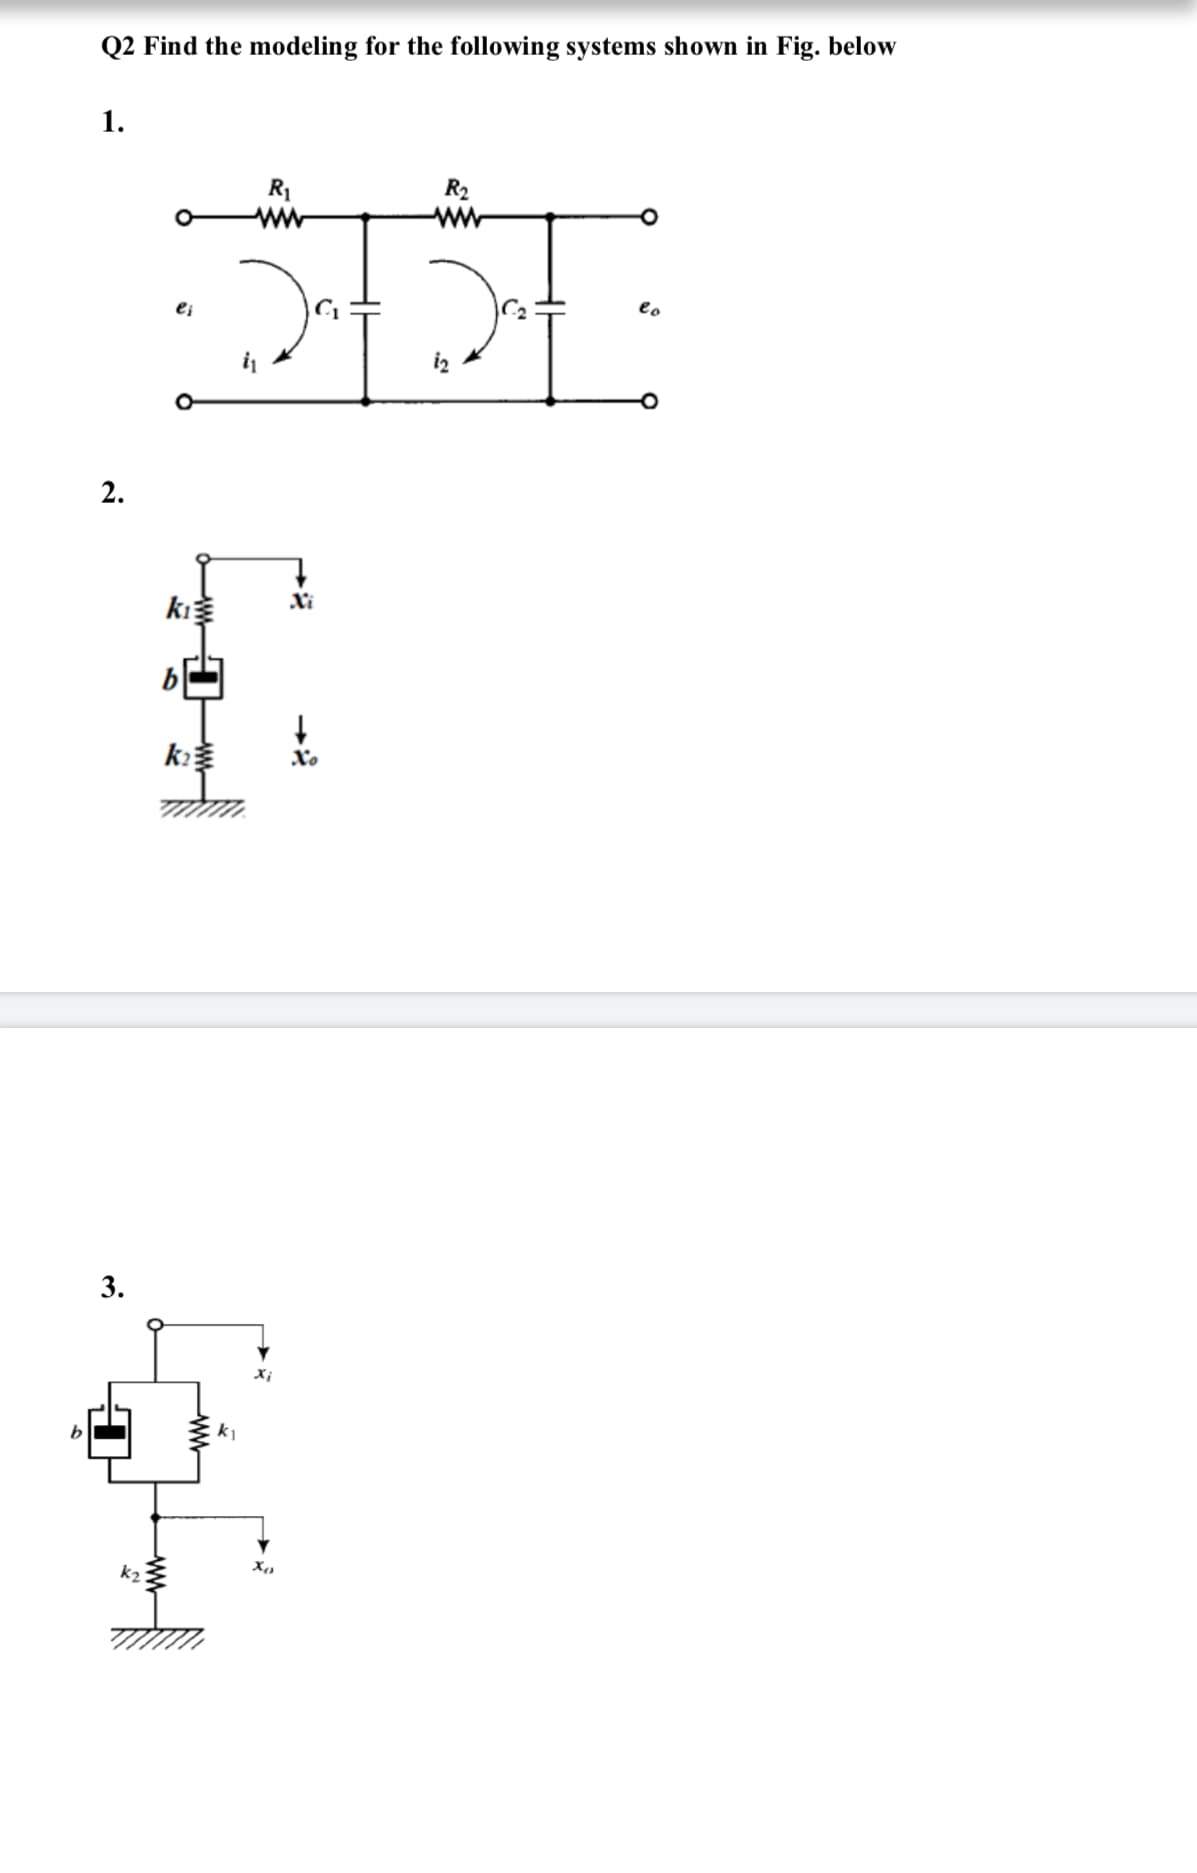 Q2 Find the modeling for the following systems shown in Fig. below
1.
R1
R2
ww
ei
eo
2.
Xi
b
k
3.
k1
